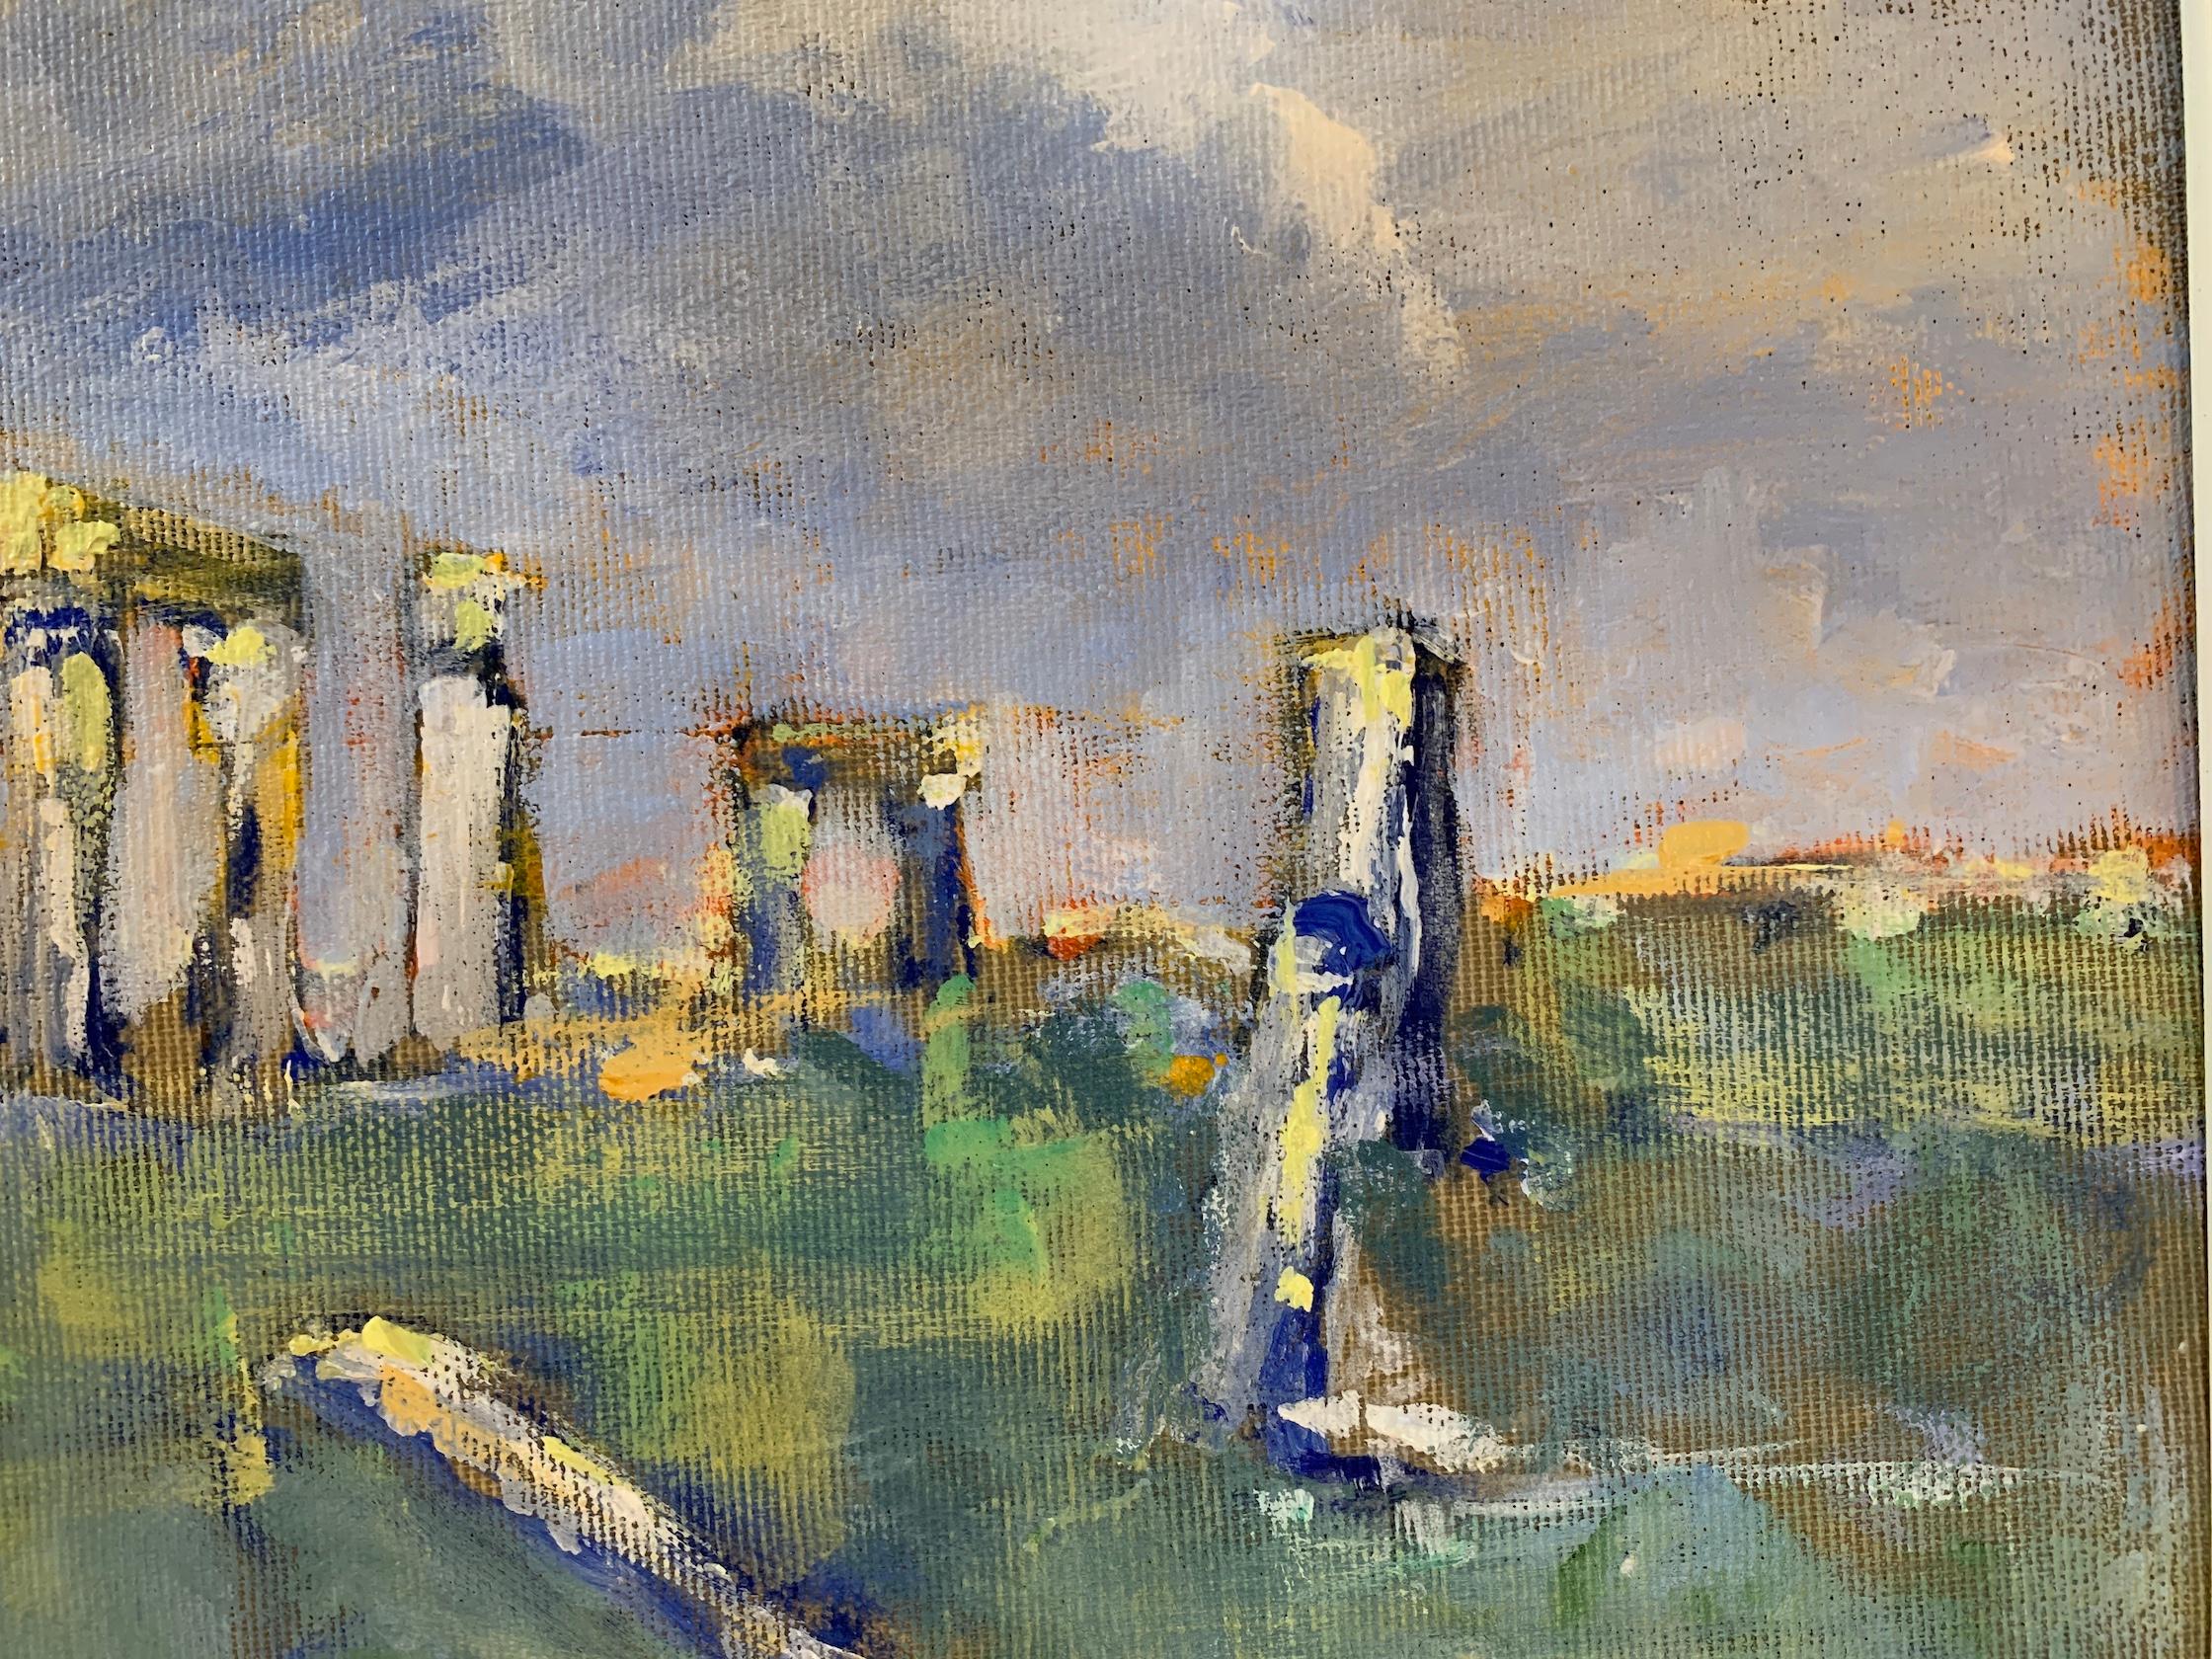  Impressionist Landscape oil of  the world famous Stone Henge in the UK

Charles Bertie Hall painted scenes all over England, Europe, and America in a traditional Impressionist manner. He exhibited in London and various States in America.

 Many of